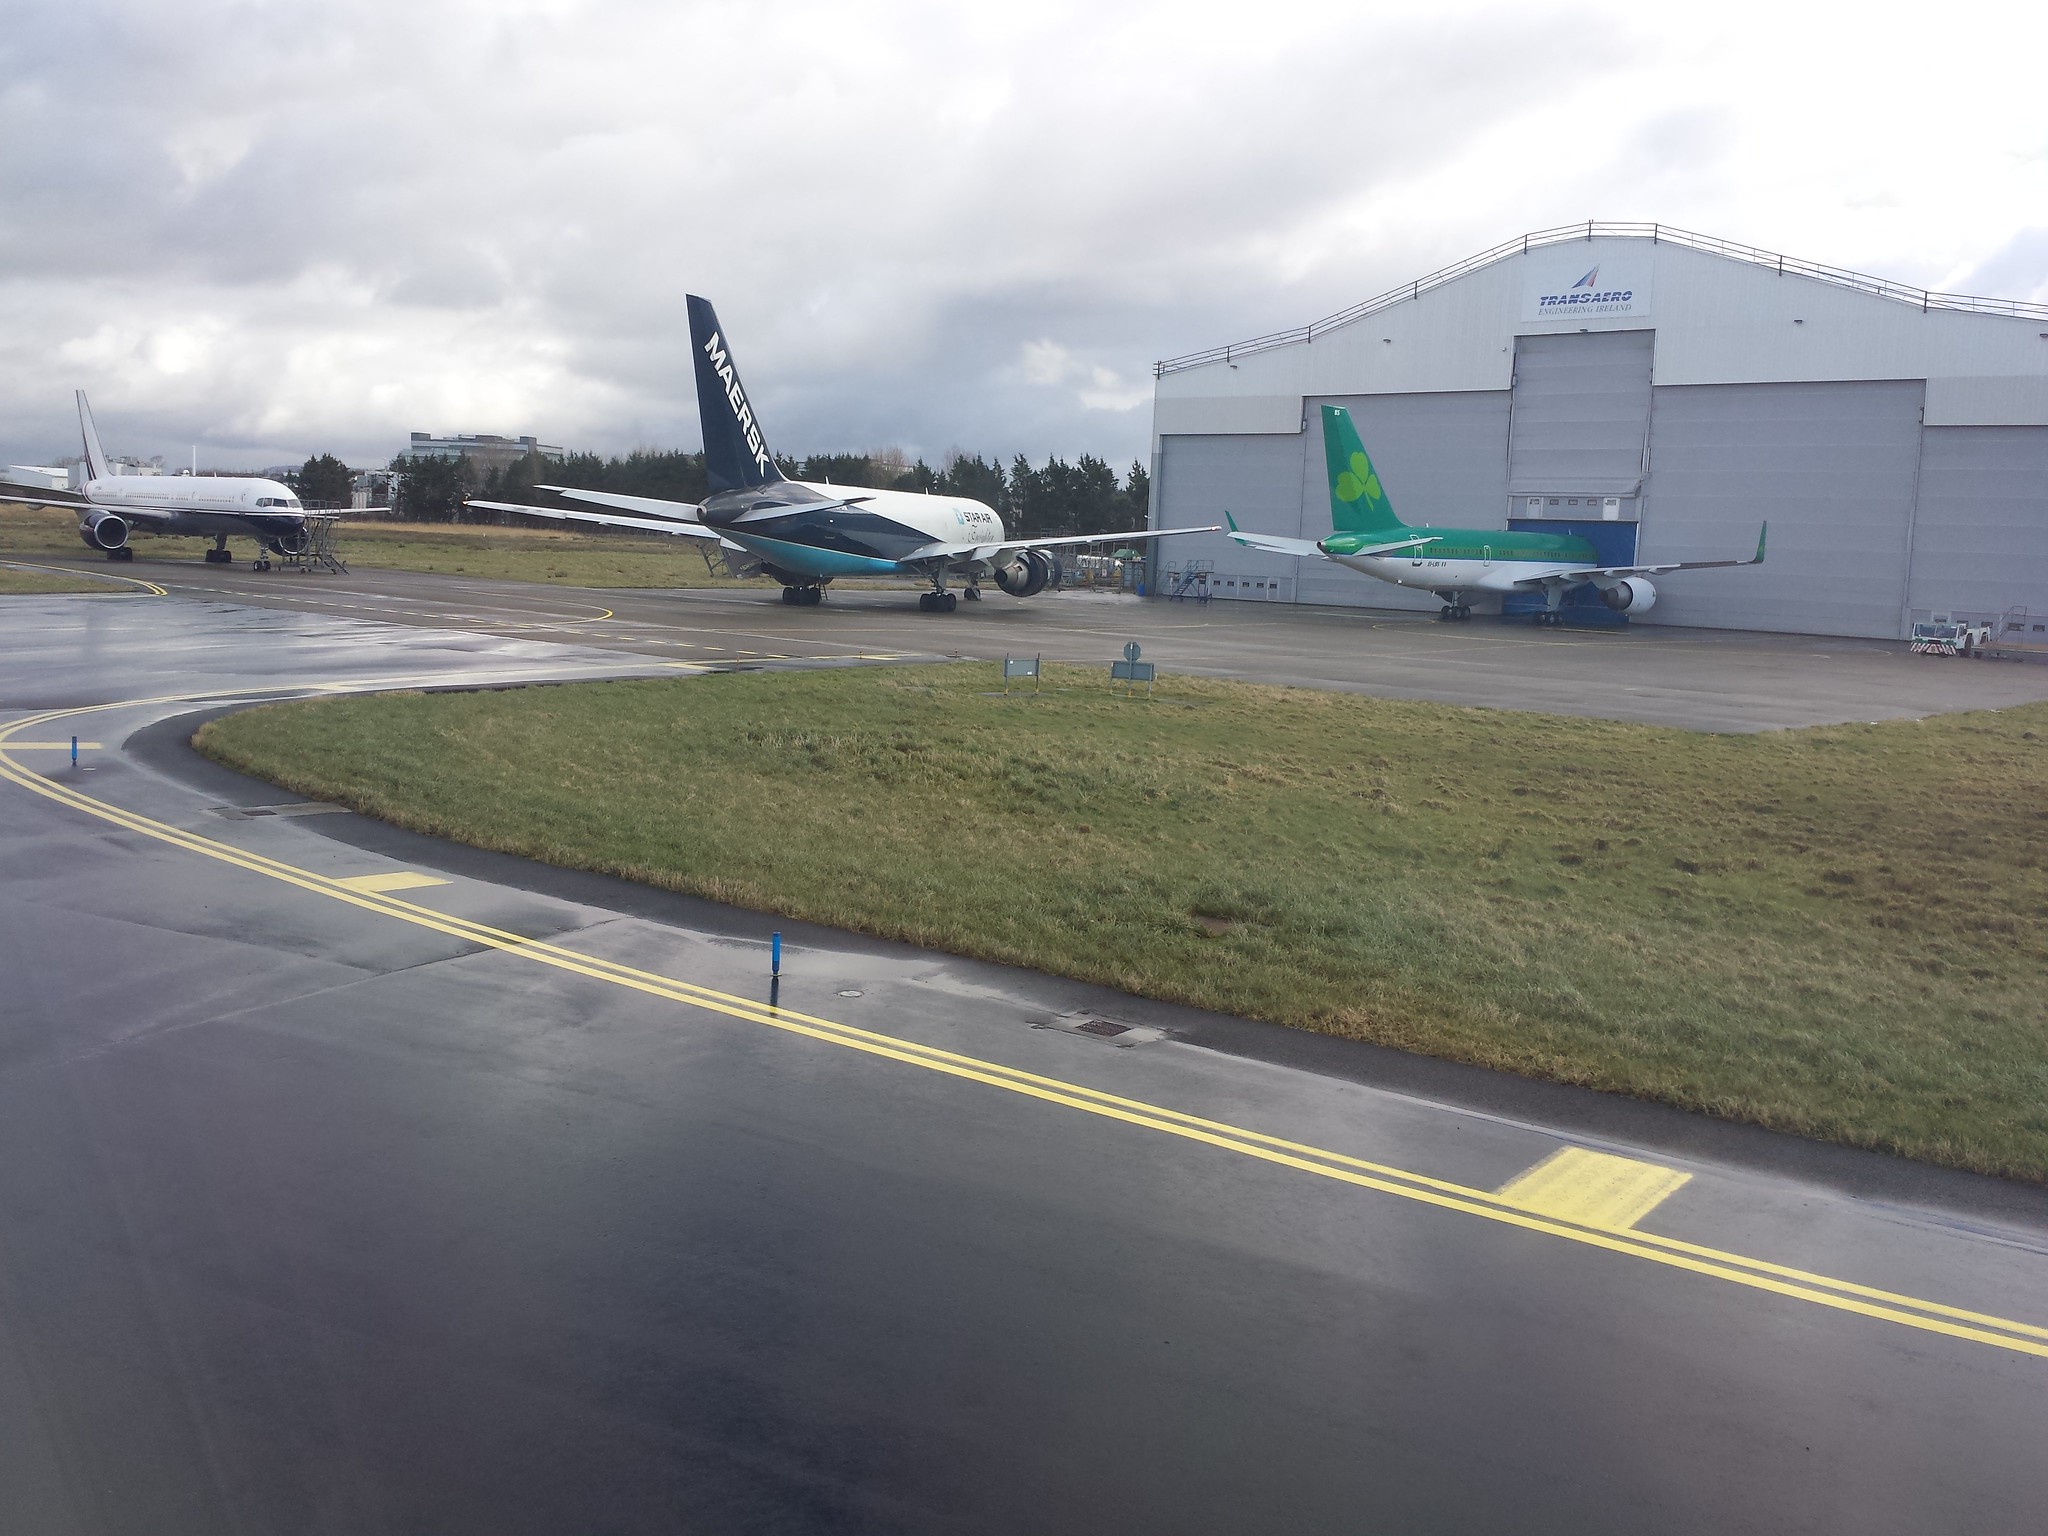 Taxiing at Shannon